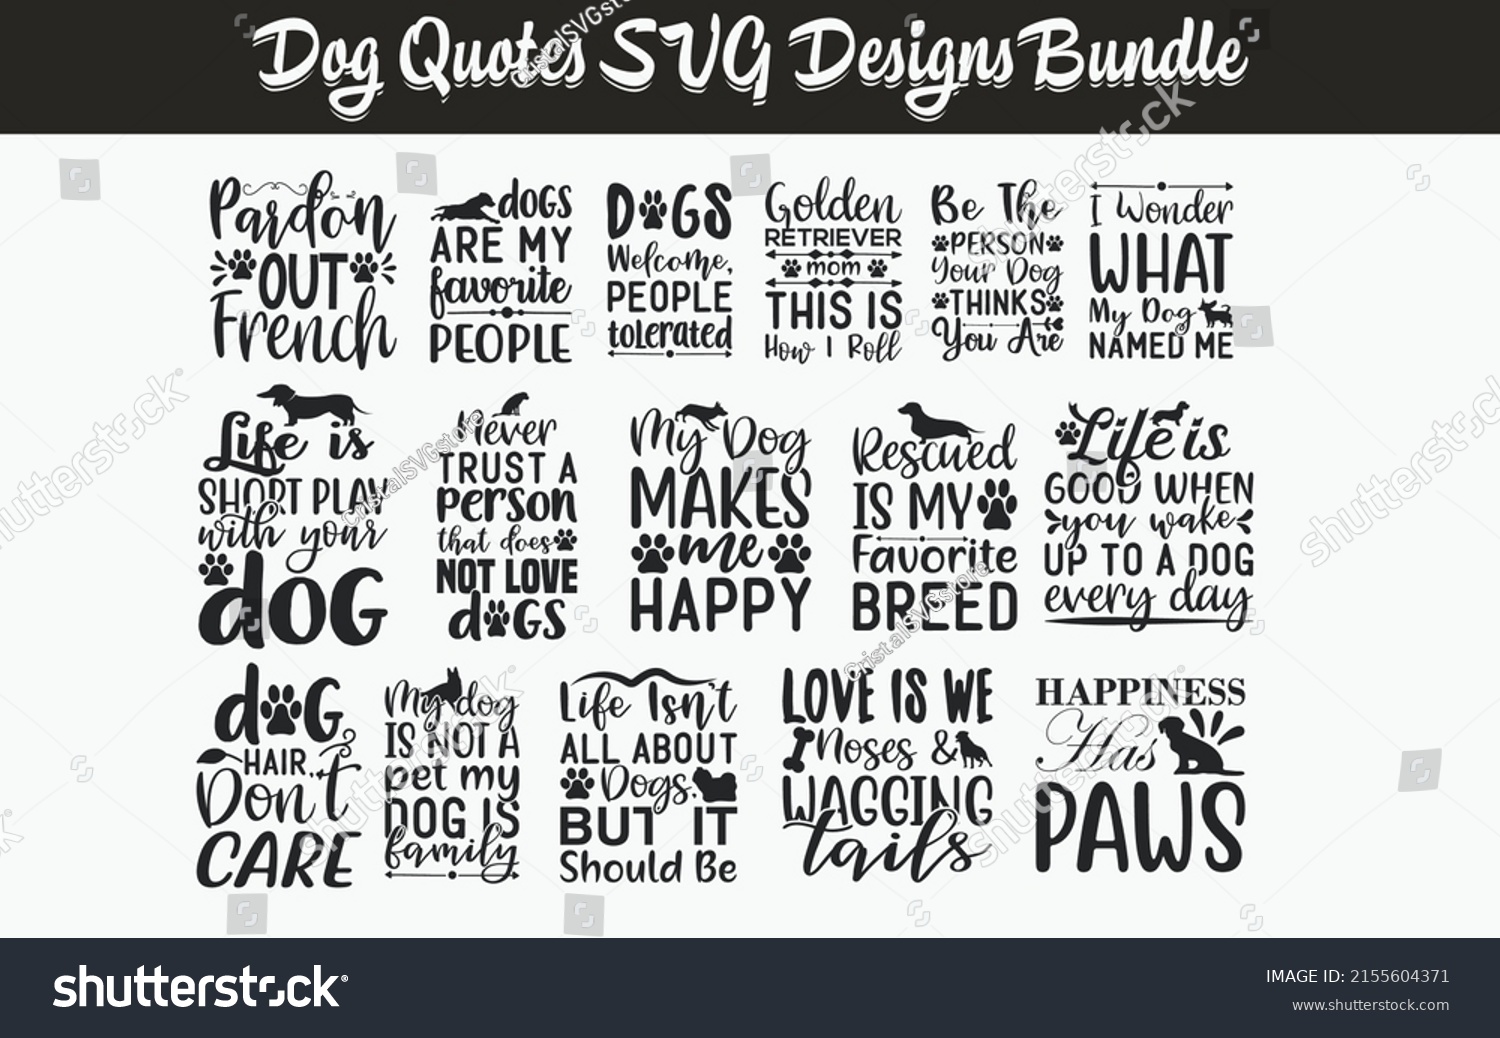 SVG of Dog Quotes SVG Cut Files Designs Bundle, Dog quotes SVG cut files, doggy quotes t shirt designs, Saying about doggy, Dog cut files, Canine quotes eps files, Saying of Pooch, svg